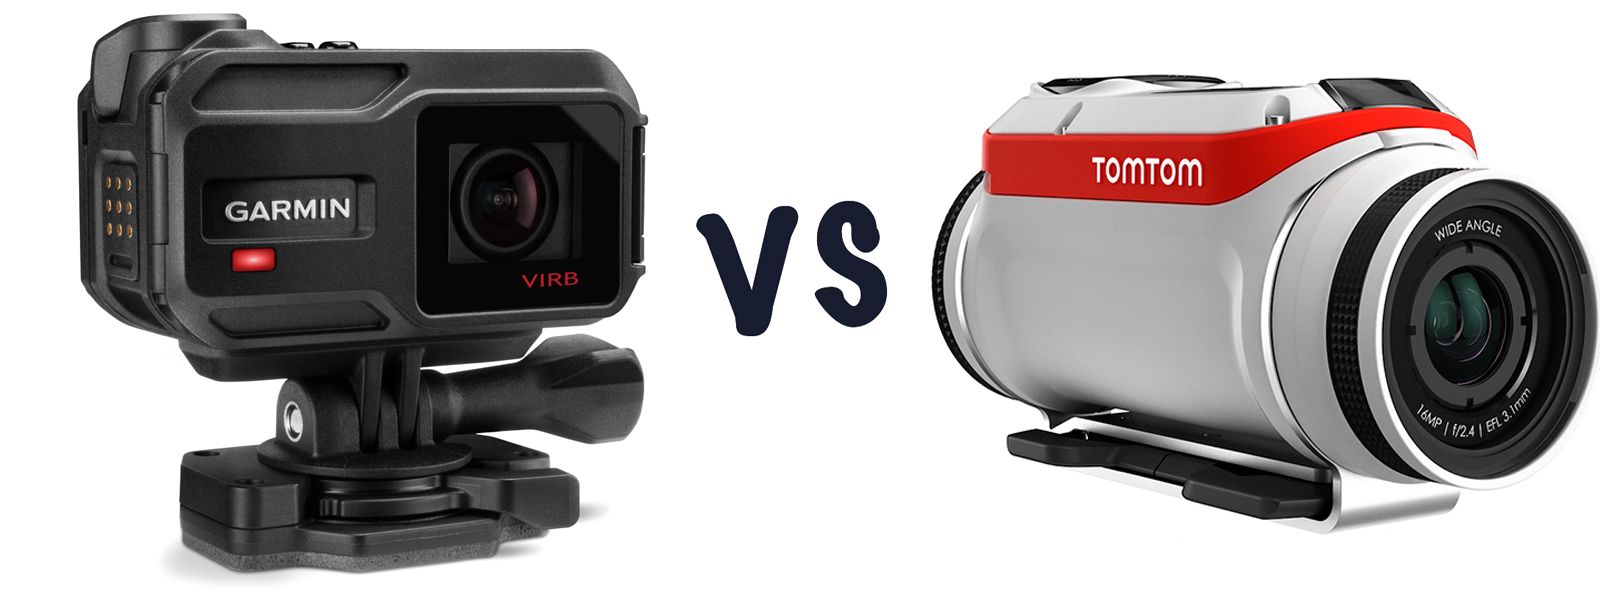 tomtom bandit vs garmin virb xe what’s the difference  image 1